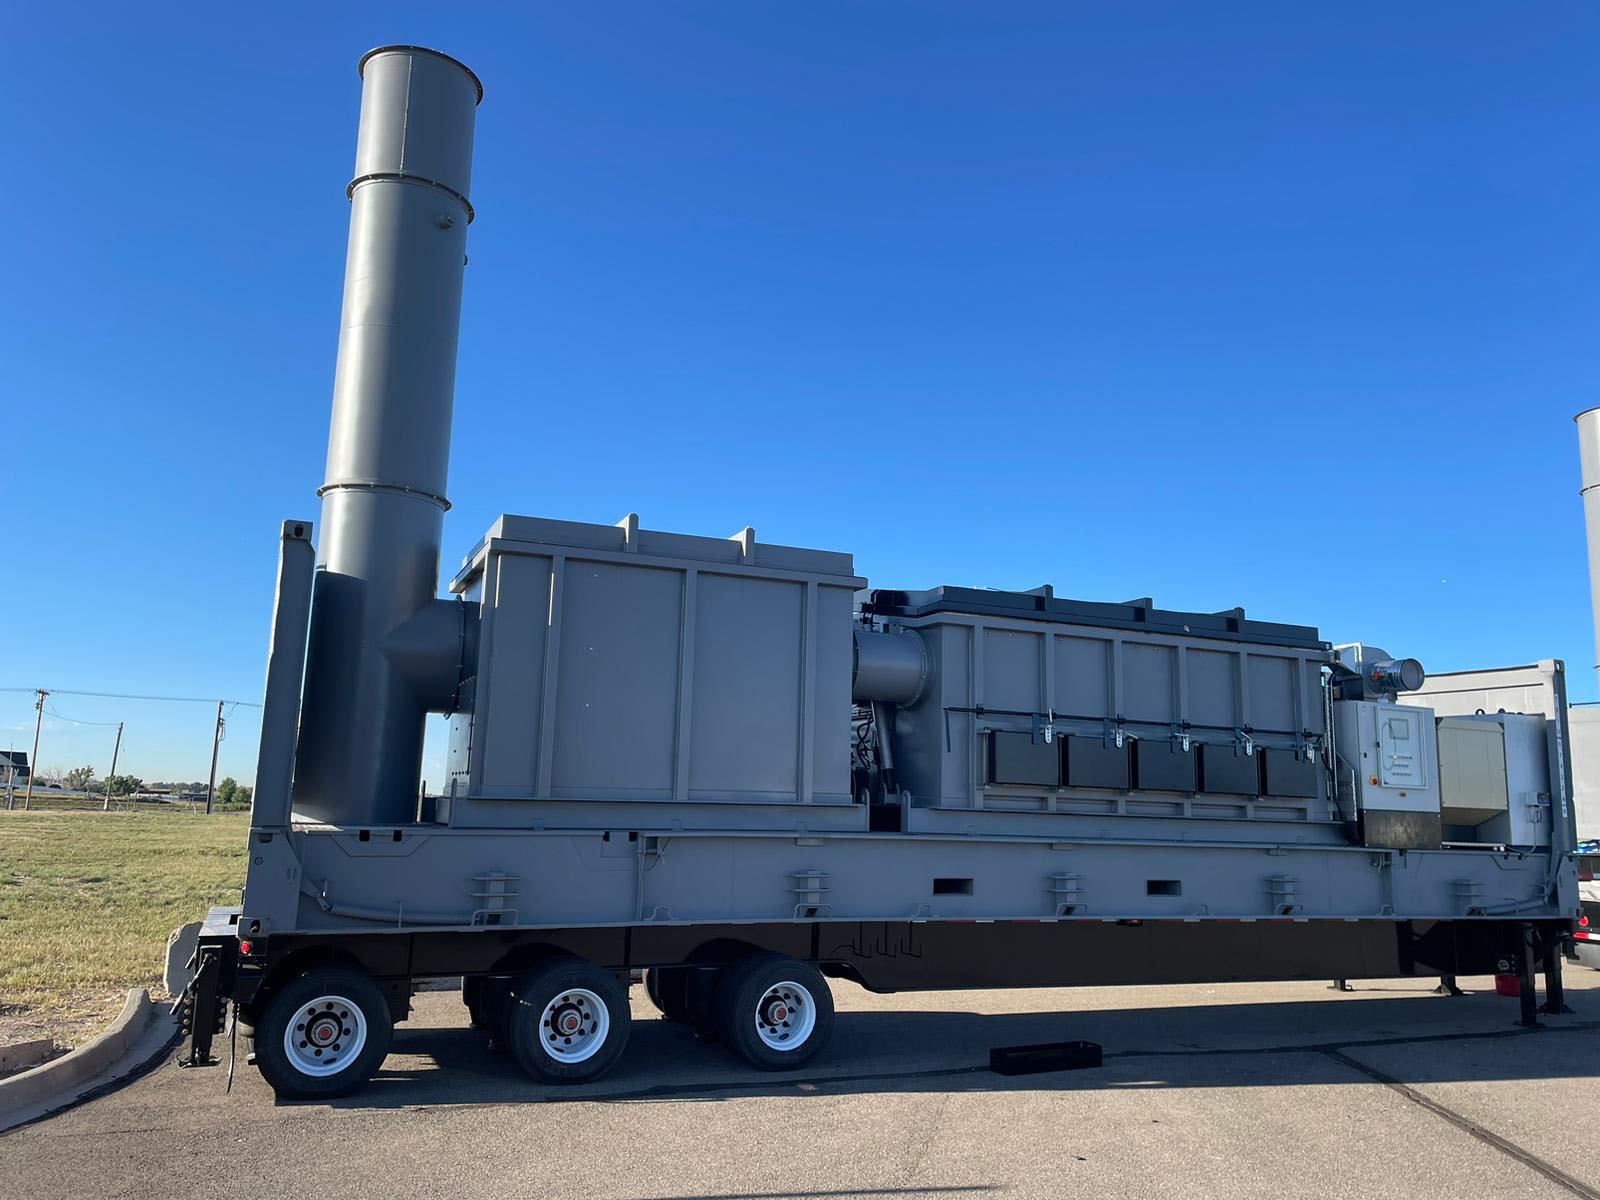 Mobile High Capacity Incinerator ready to operate